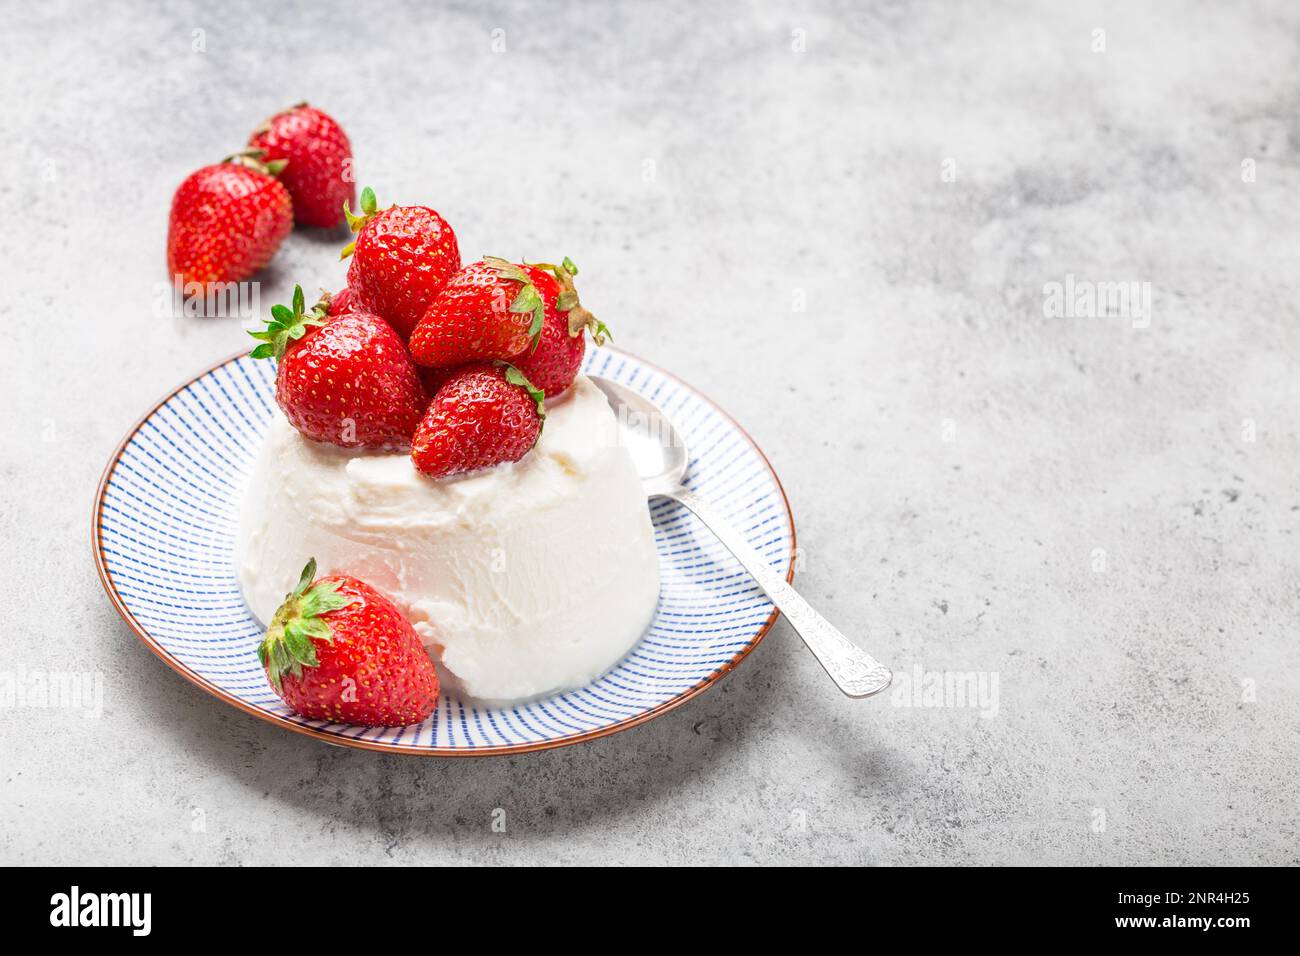 Close-up of fresh Italian cheese ricotta with strawberries on a plate with a spoon, grey rustic stone background, light summer dessert or snack, good Stock Photo